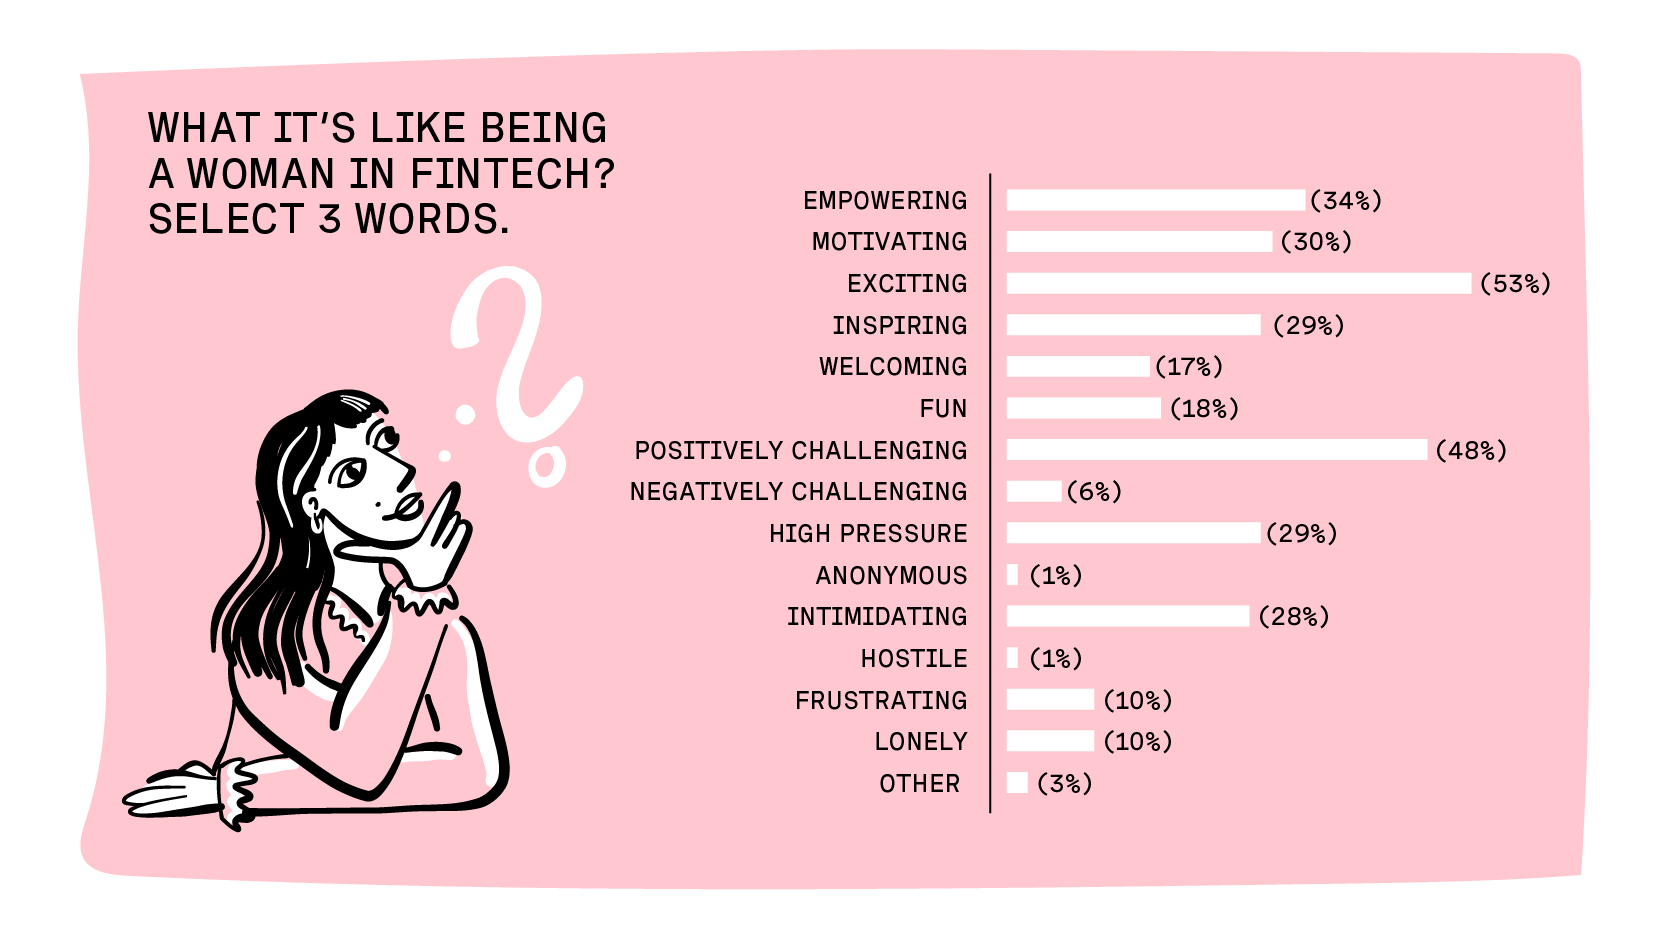 Graph showing the top 3 words for being a woman in fintech 